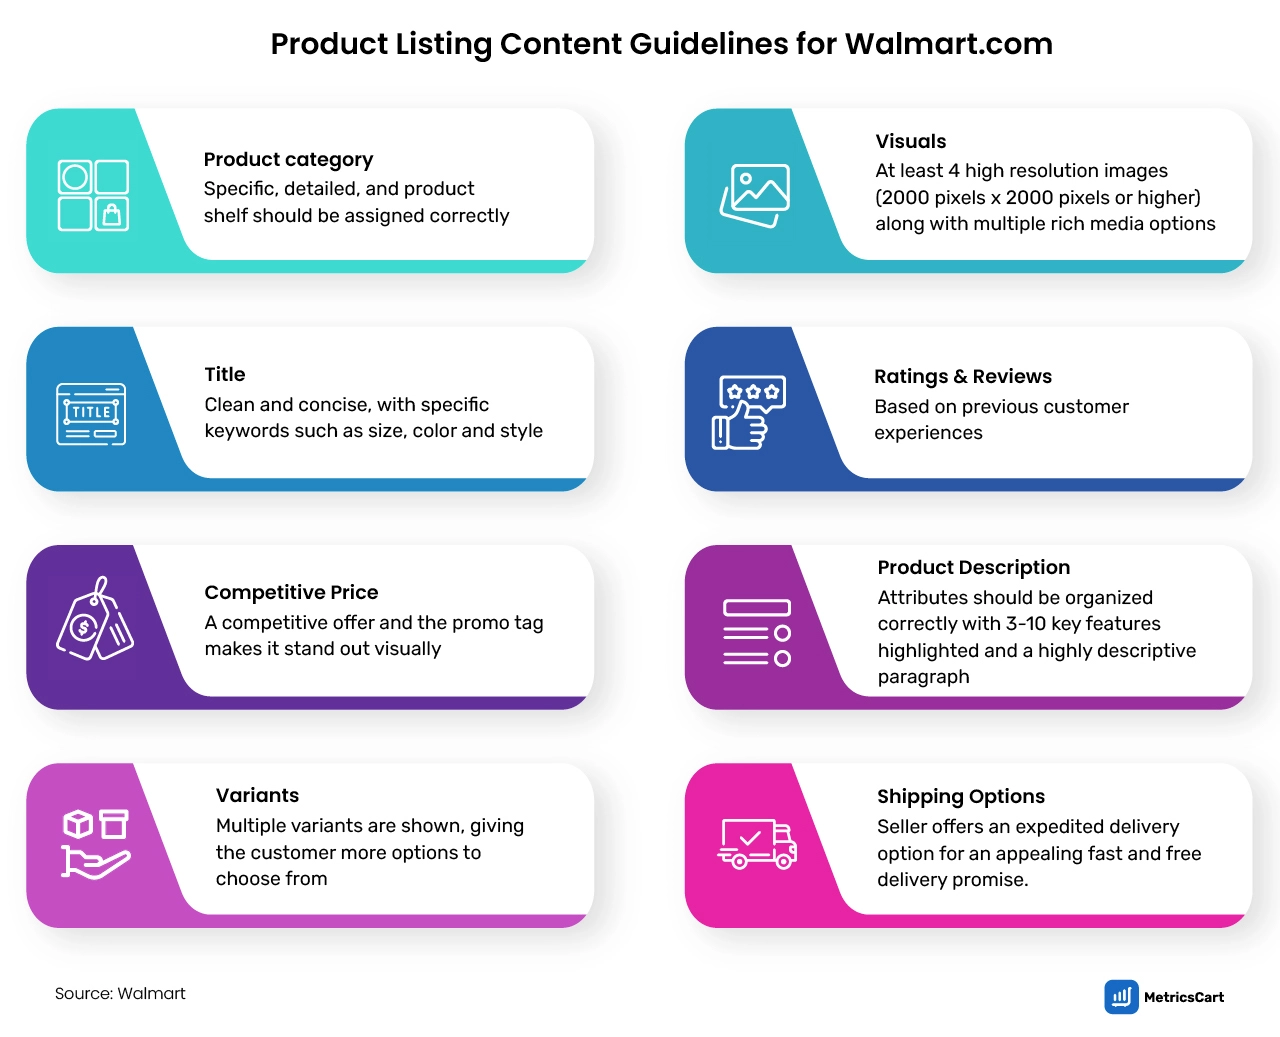 Product Listing Content Compliance Checklist for Walmart Marketplace 